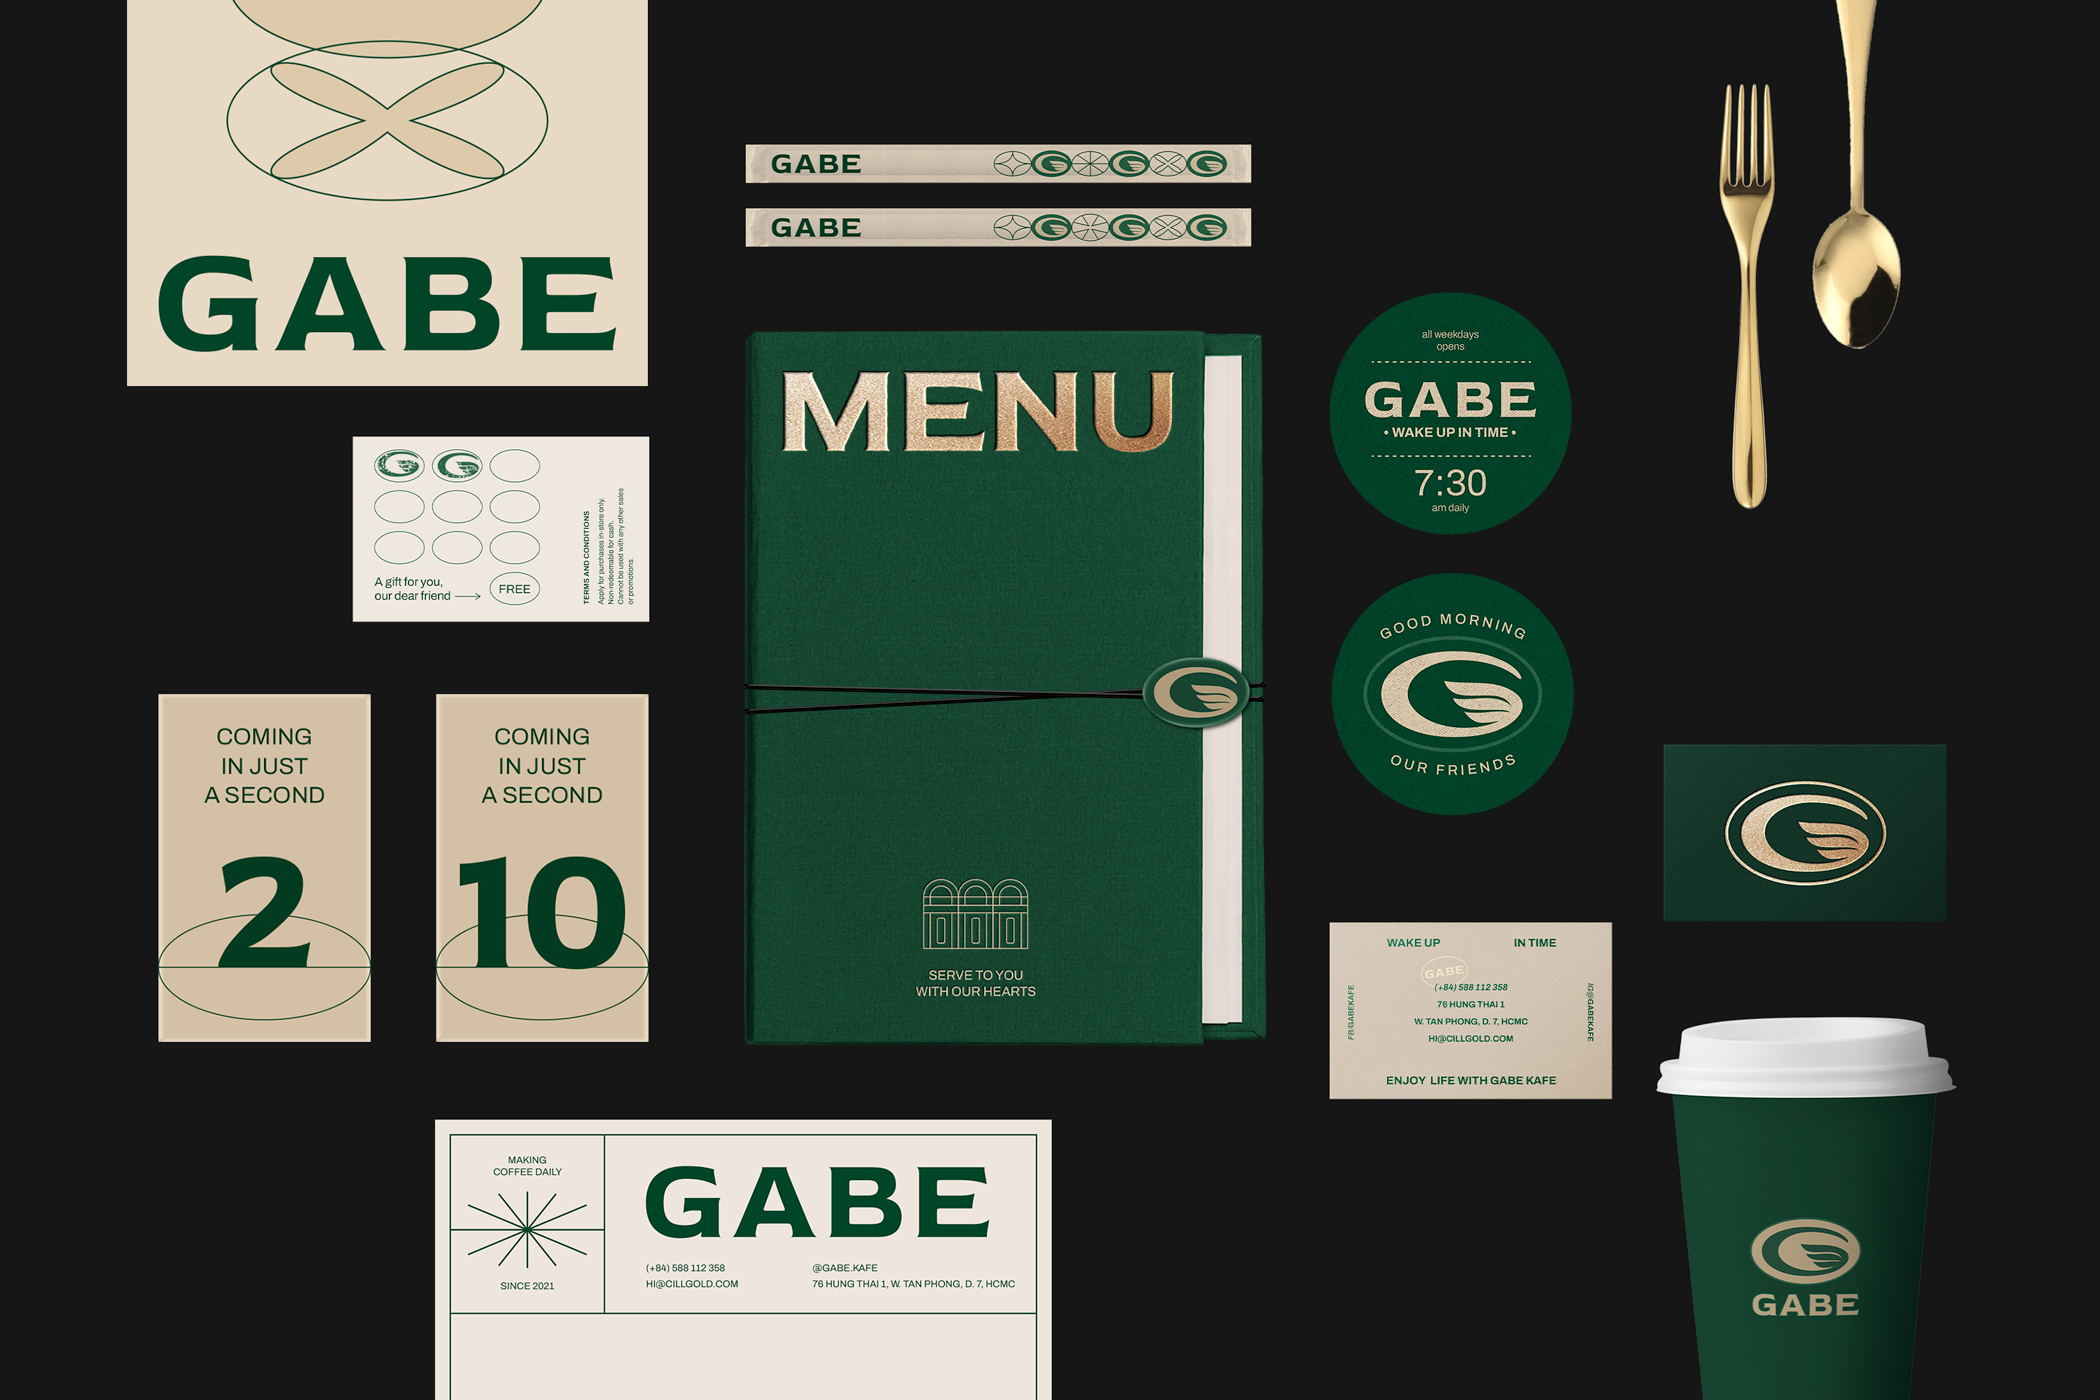 Gabe Designed By Cillgold: Embrace The Exquisite Blend Of Premium Coffee And Cozy Elegance